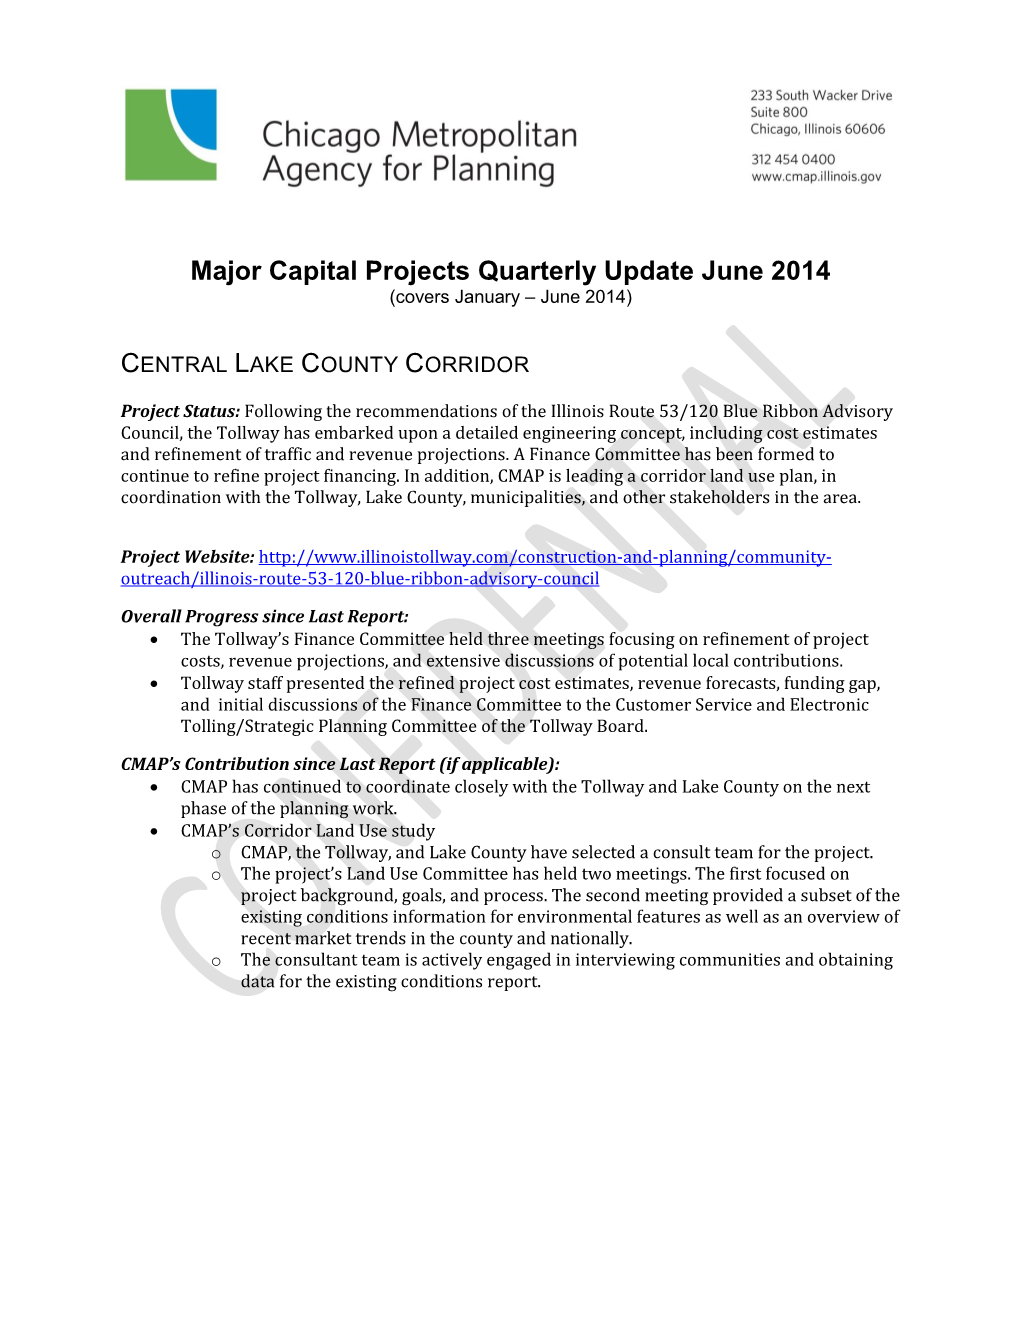 Major Capital Projects Quarterly Update June 2014 (Covers January – June 2014)